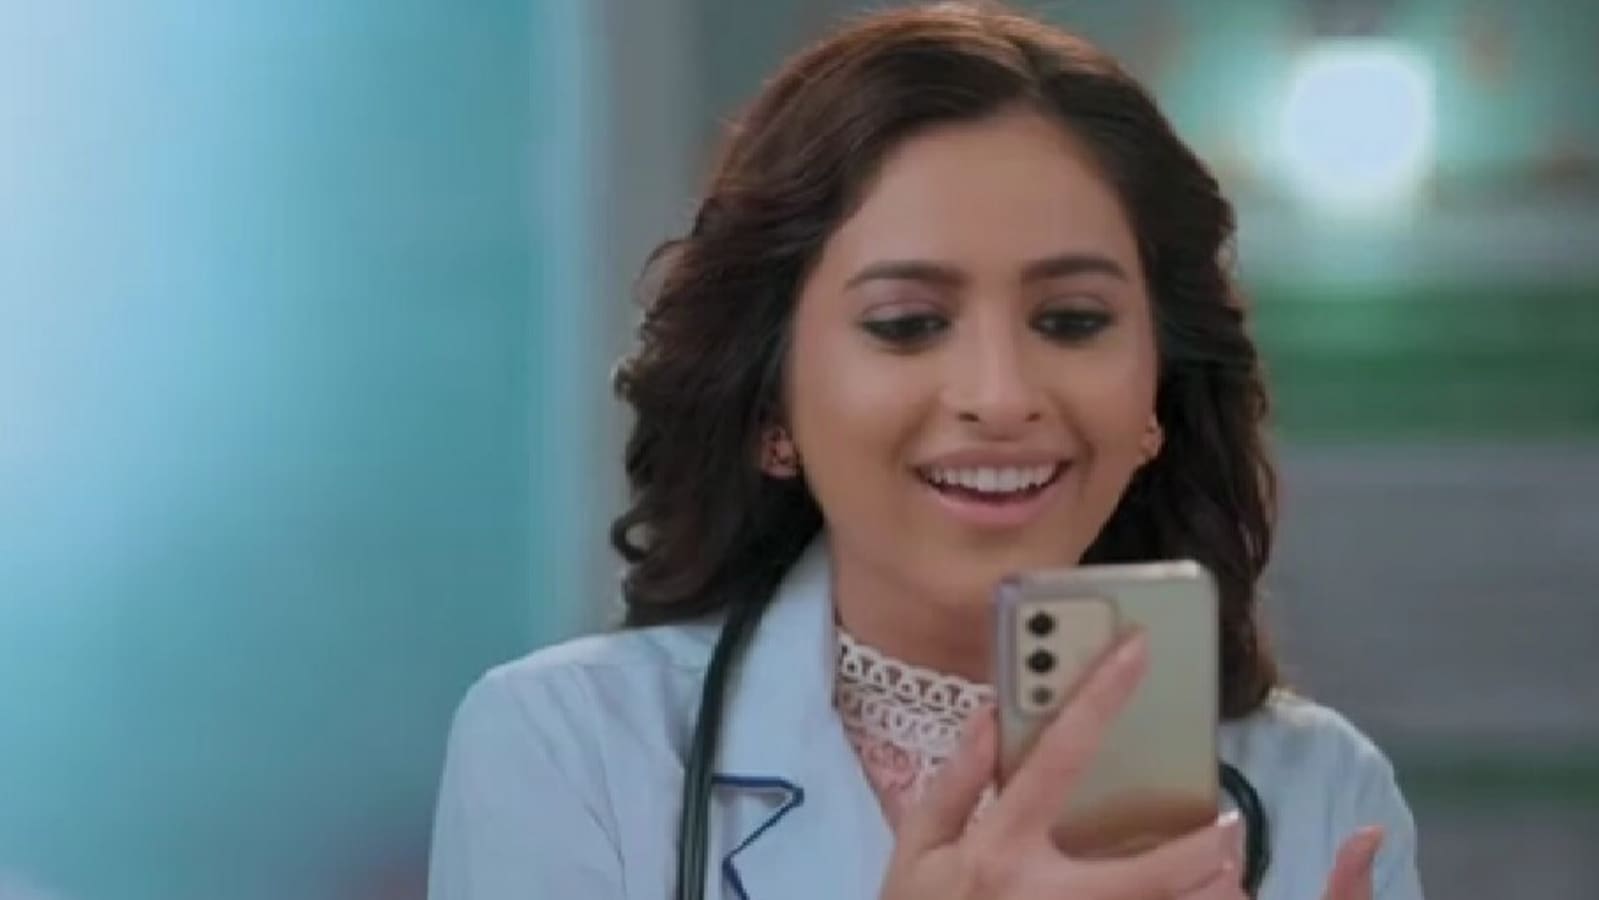 Yeh Rishta Kya Kehlata Hai written update July 12: Aarohi elated after getting promotion but makes mistake at hospital